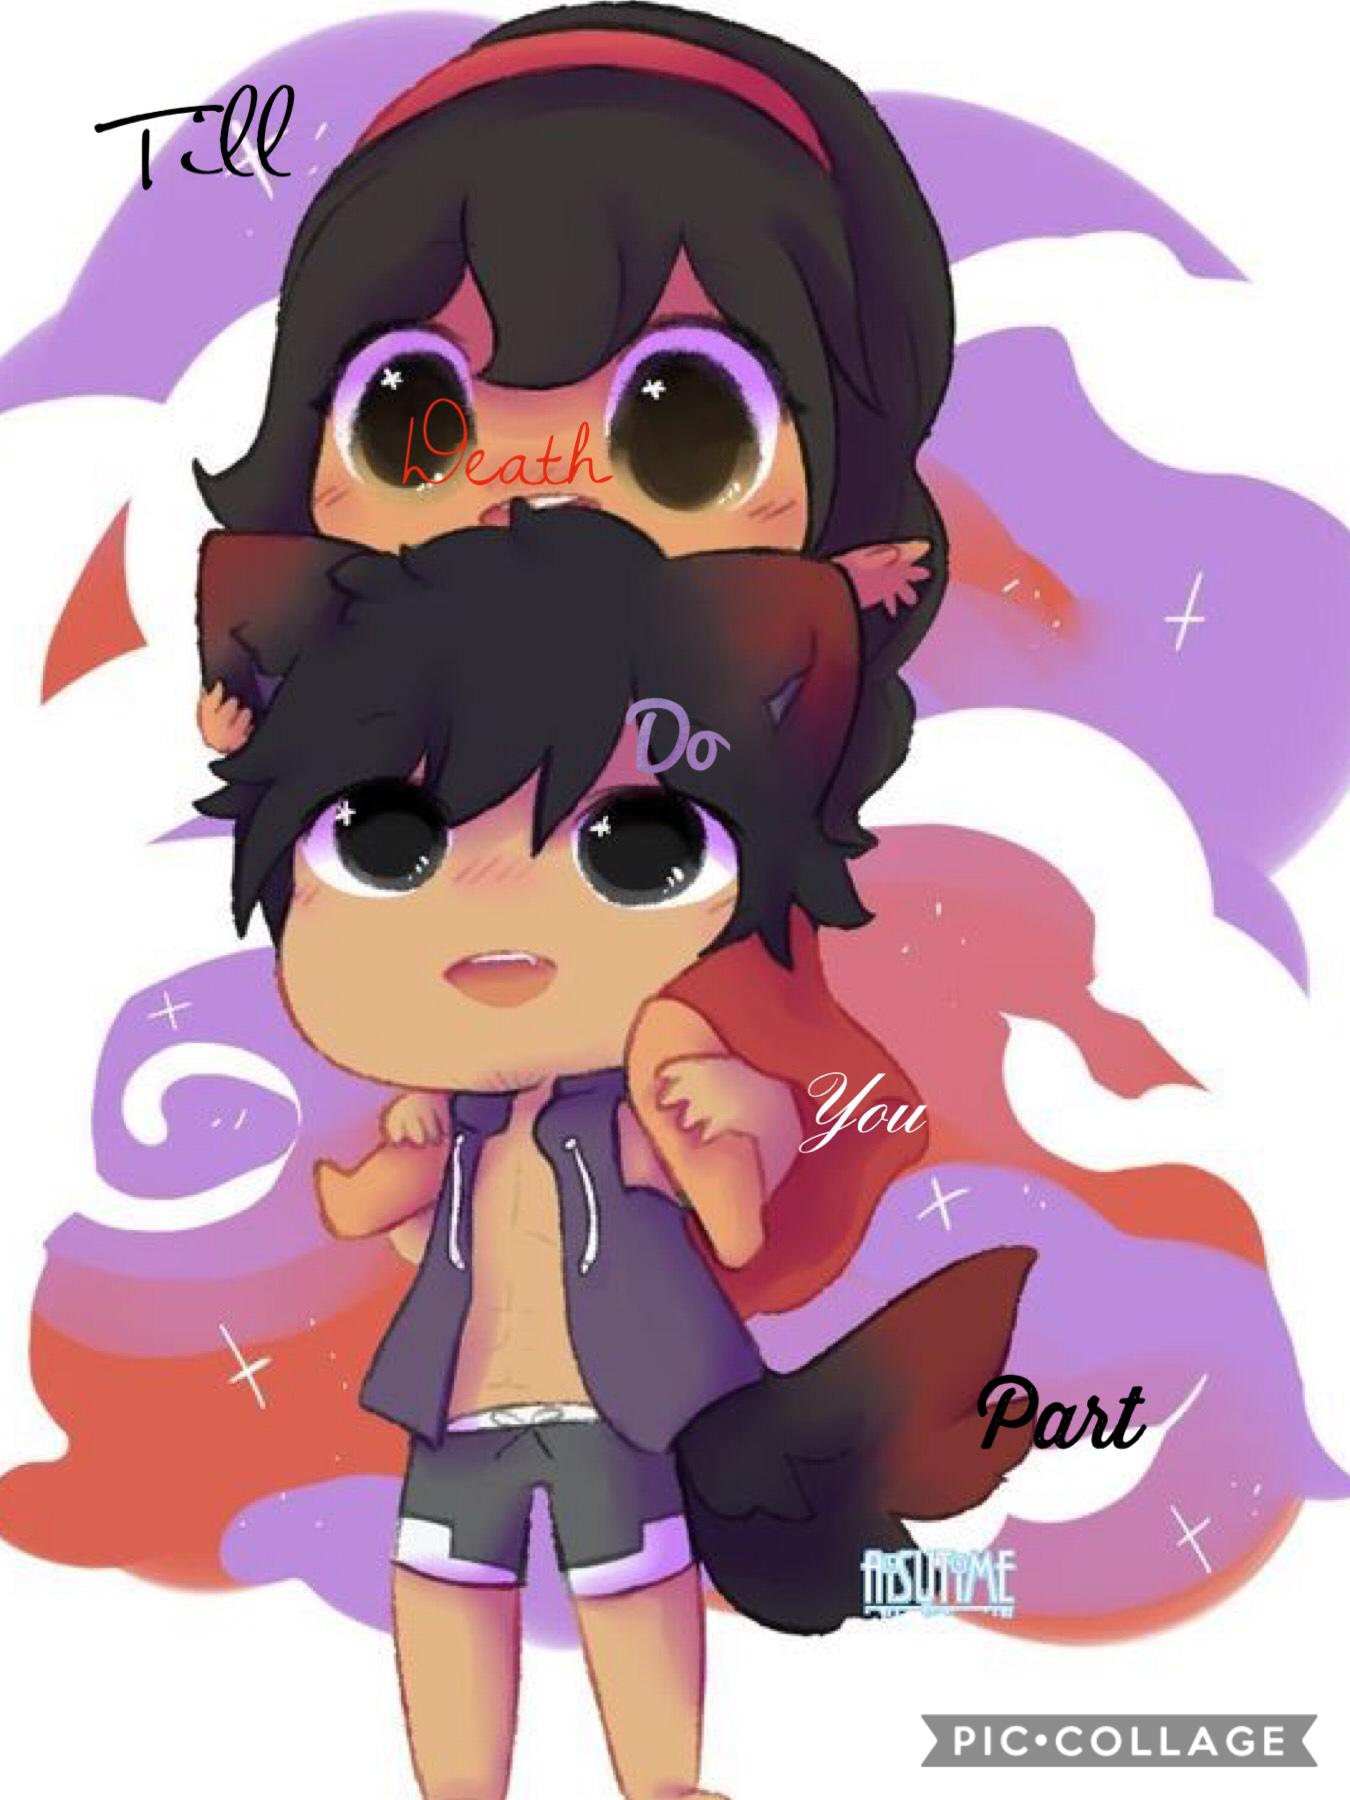 Tap
I love this ship aarmau, I’m obsessed with aphmau so heheh